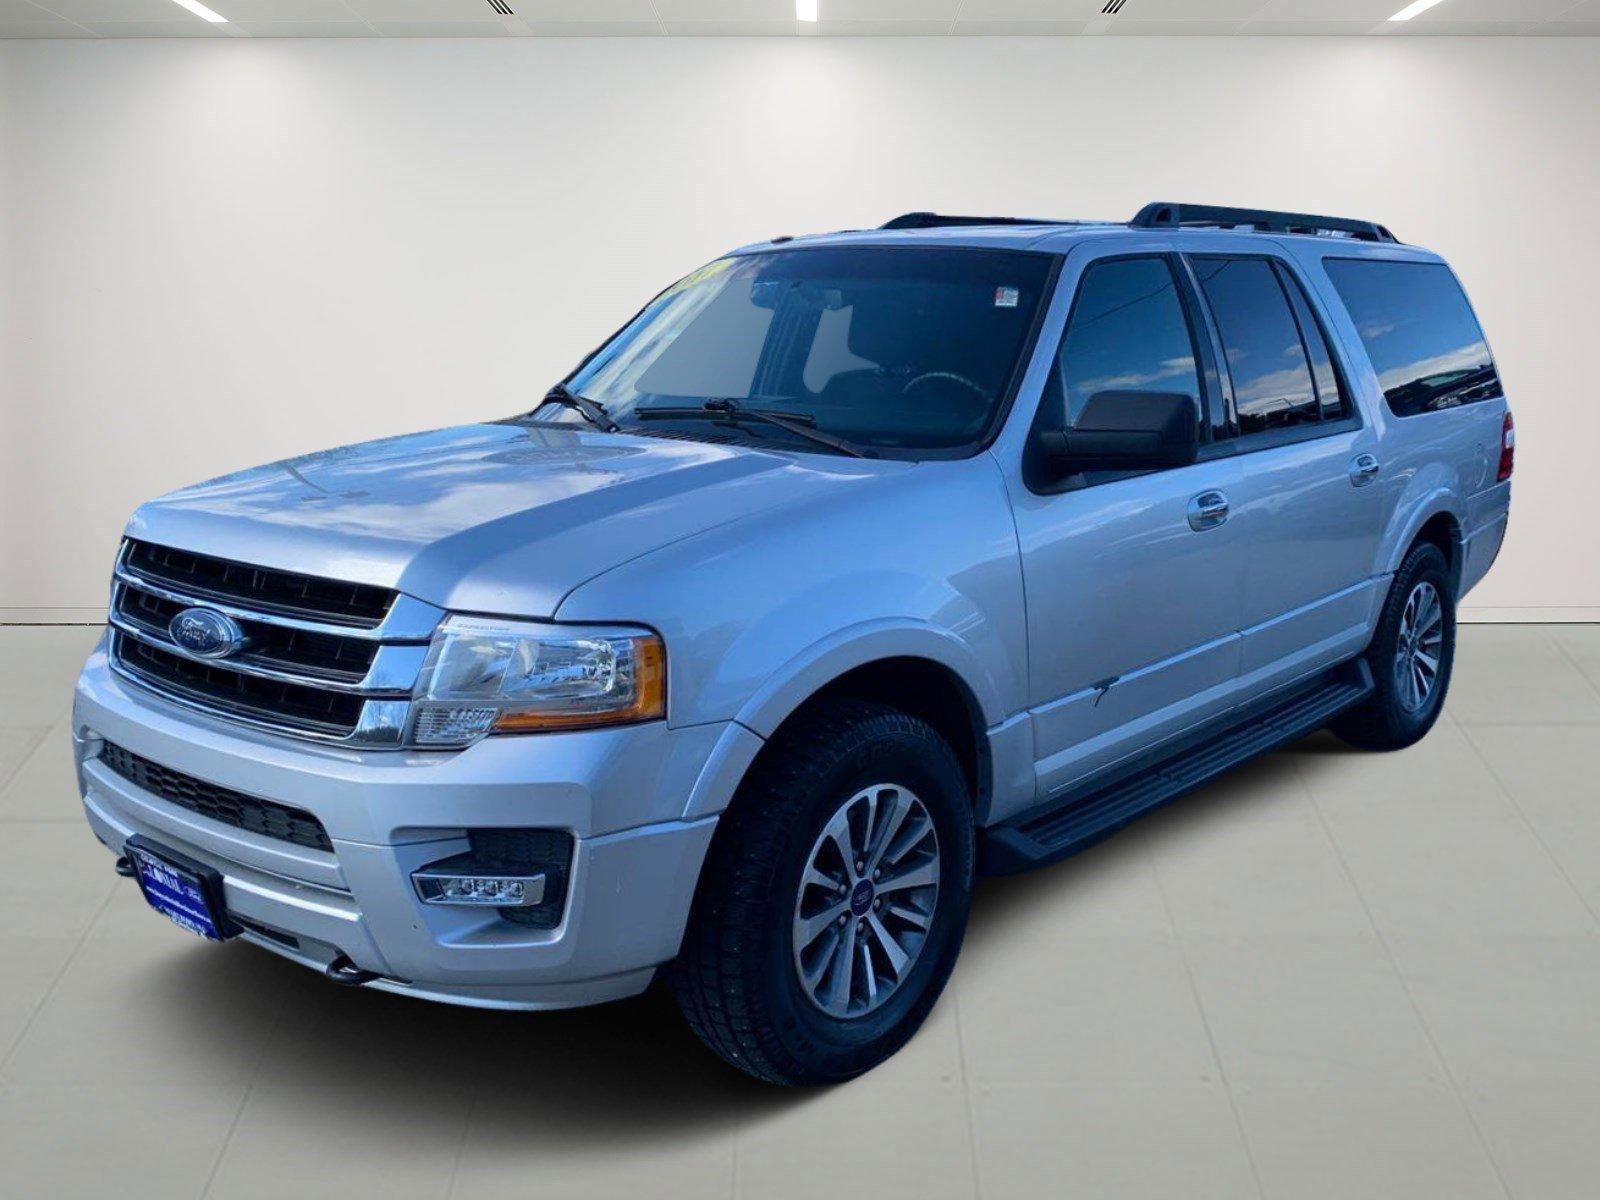 2017 Used Ford Expedition EL XLT 4x4 for sale near Framingham | 22257B